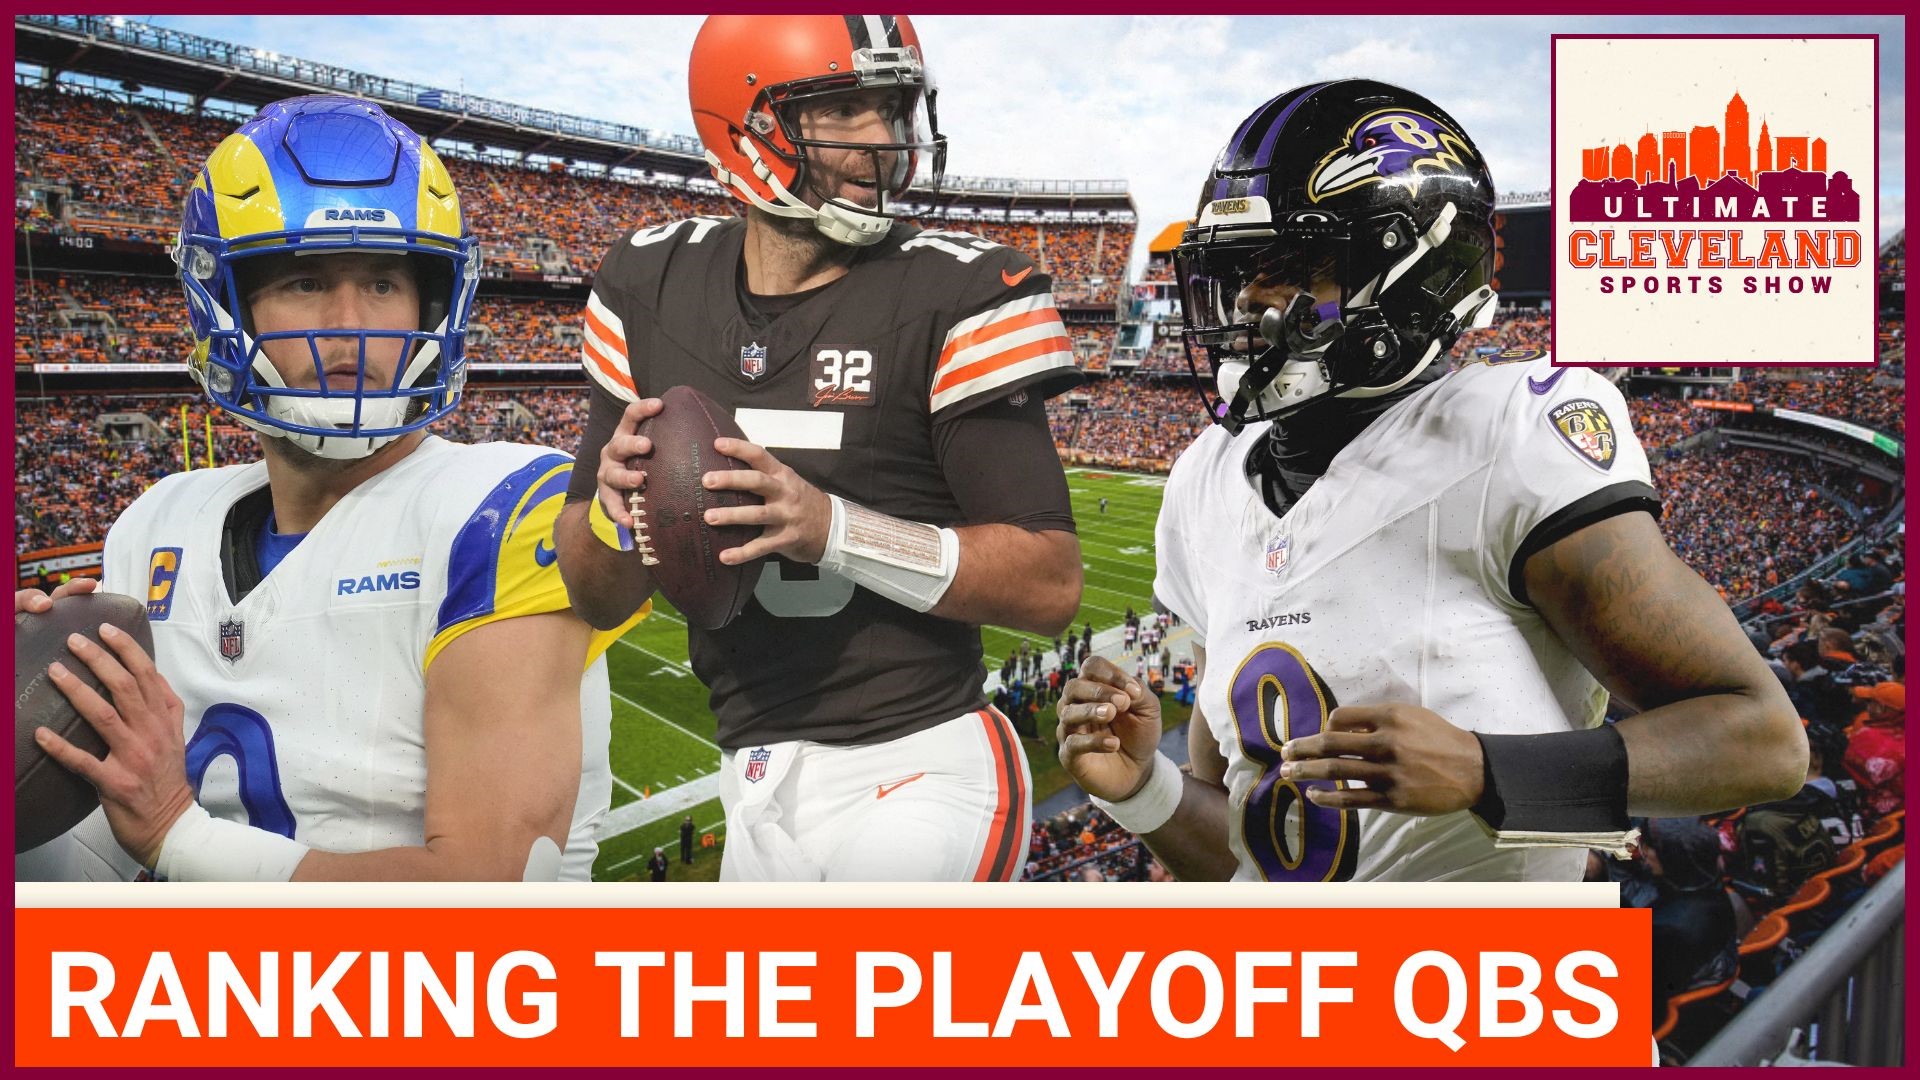 The Cleveland Browns, for once, have experience on their side in the postseason.

Joe Flacco has etched his name in the NFL record books in terms of postseason play,